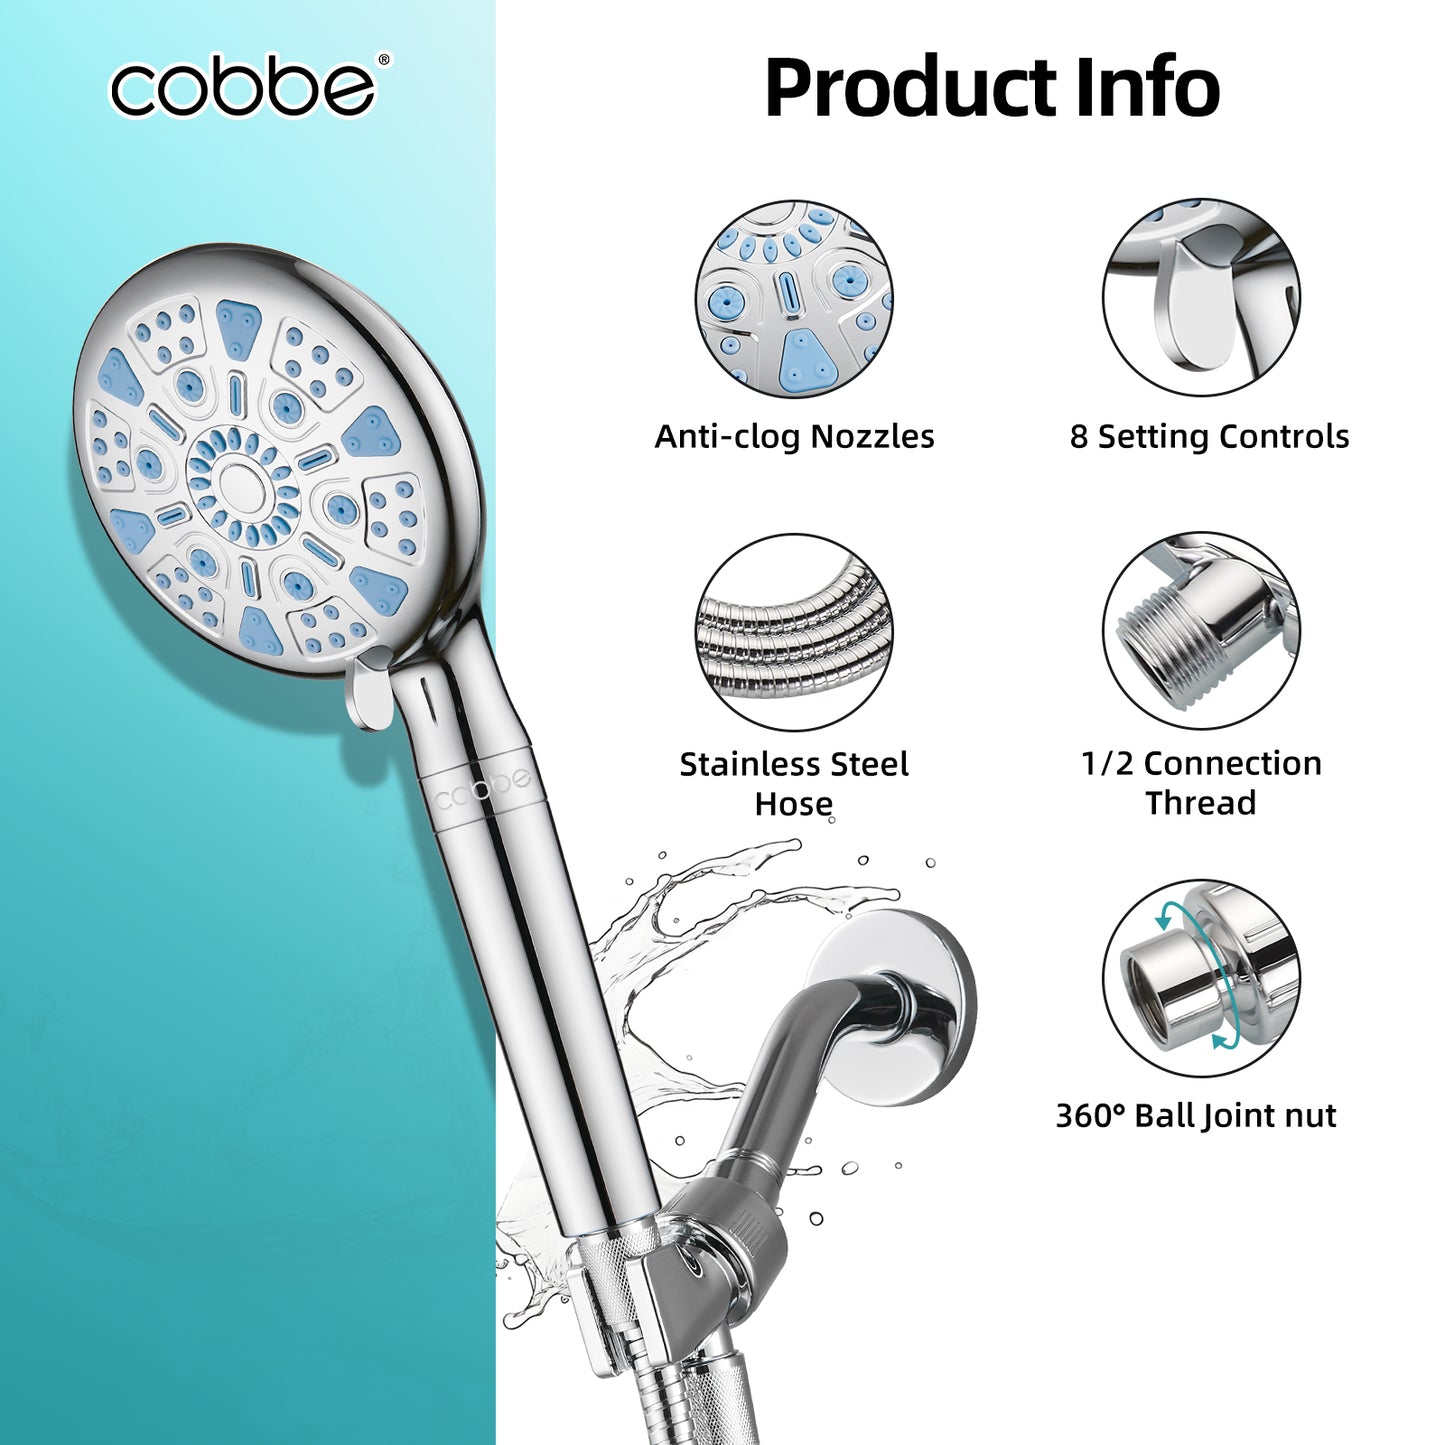 Cobbe Filtered Shower Head with Handheld, High Pressure 9 Spray Mode Shower Head with Filters, Built-in Power Spray to Clean Corner, Water Softener Filters Beads for Hard Water, Remove Chlorine